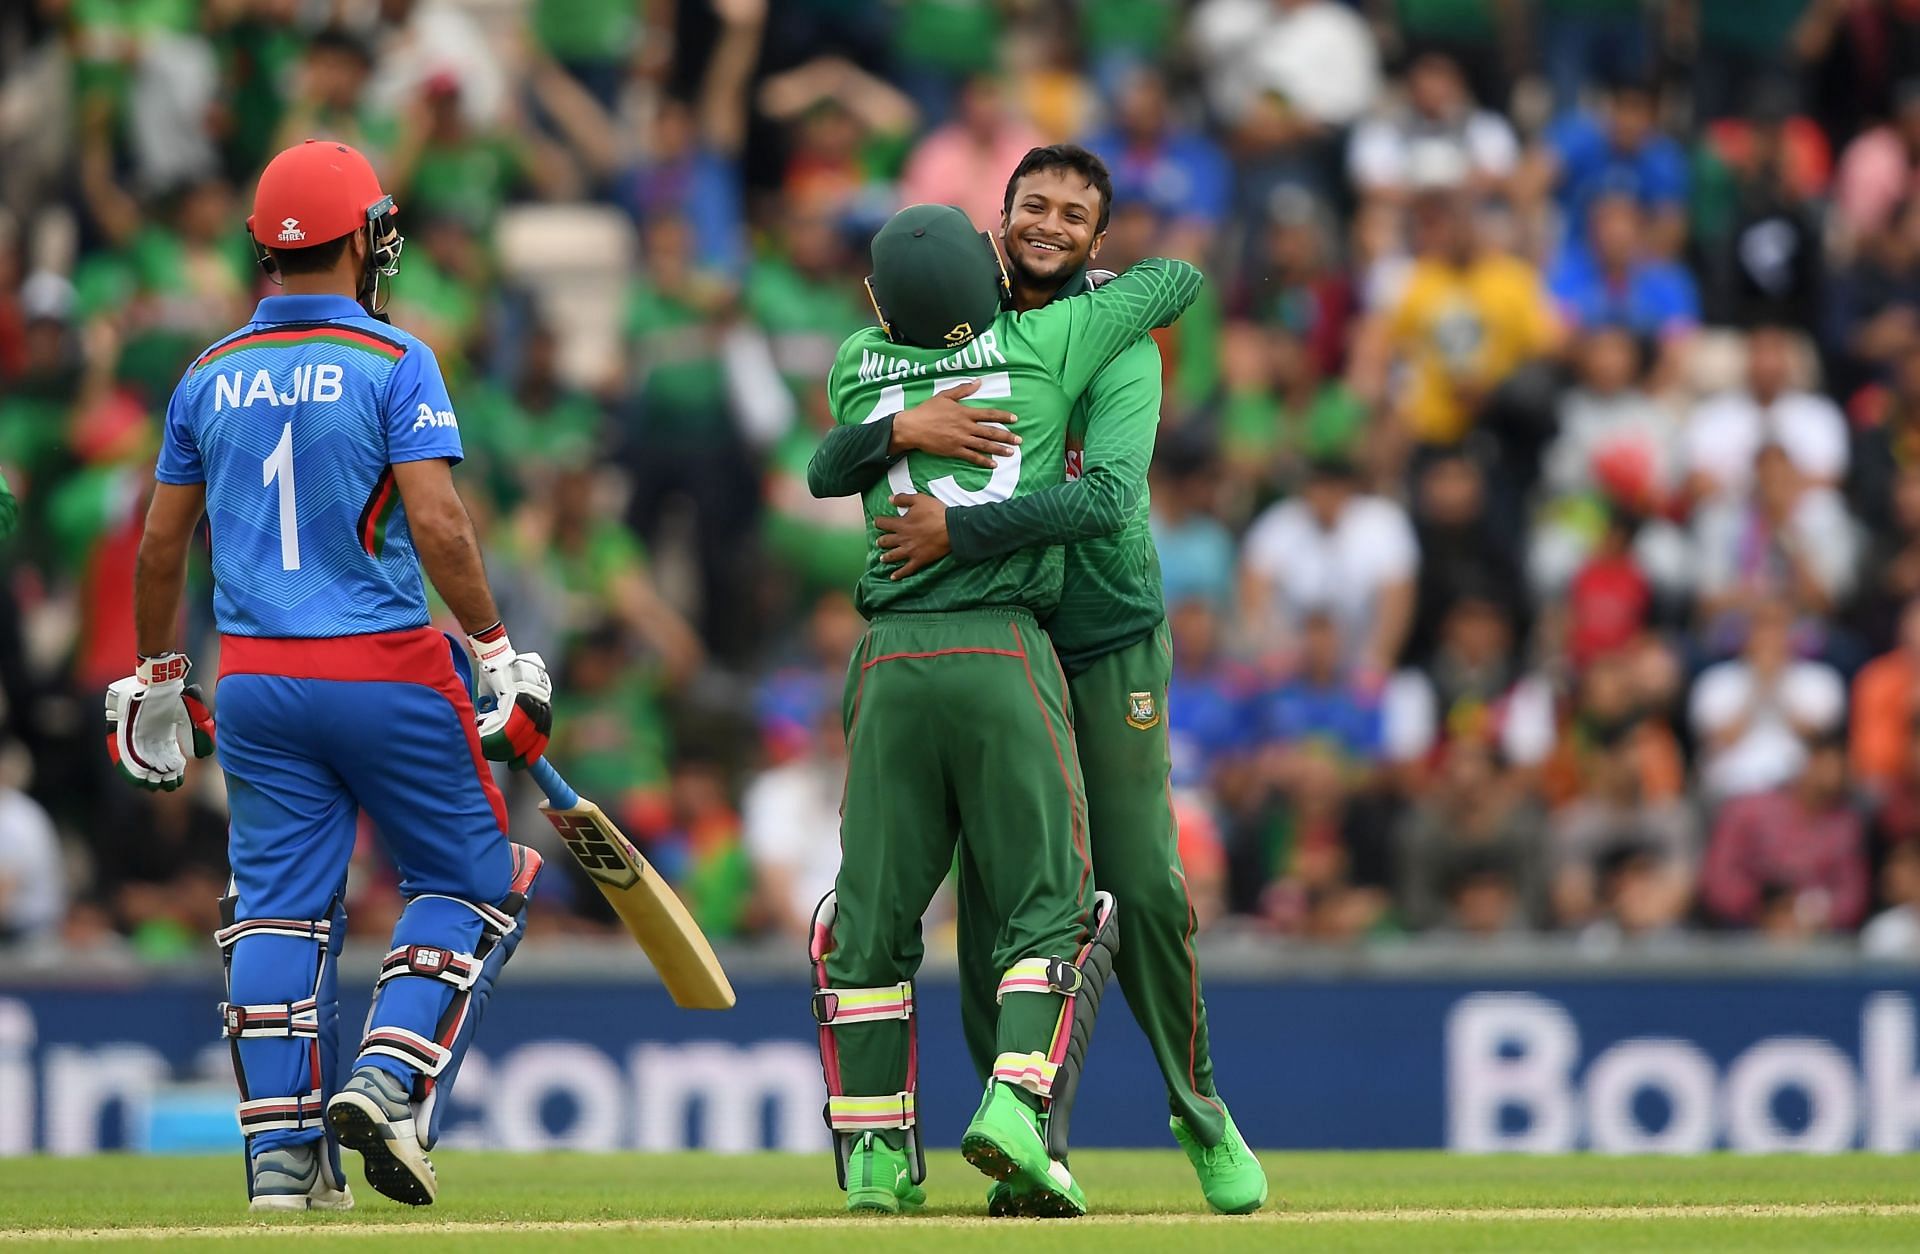 Bangladesh vs Afghanistan, 1st T20I: Probable XIs, Match Prediction, Pitch Report, Weather Forecast and Live Streaming Details